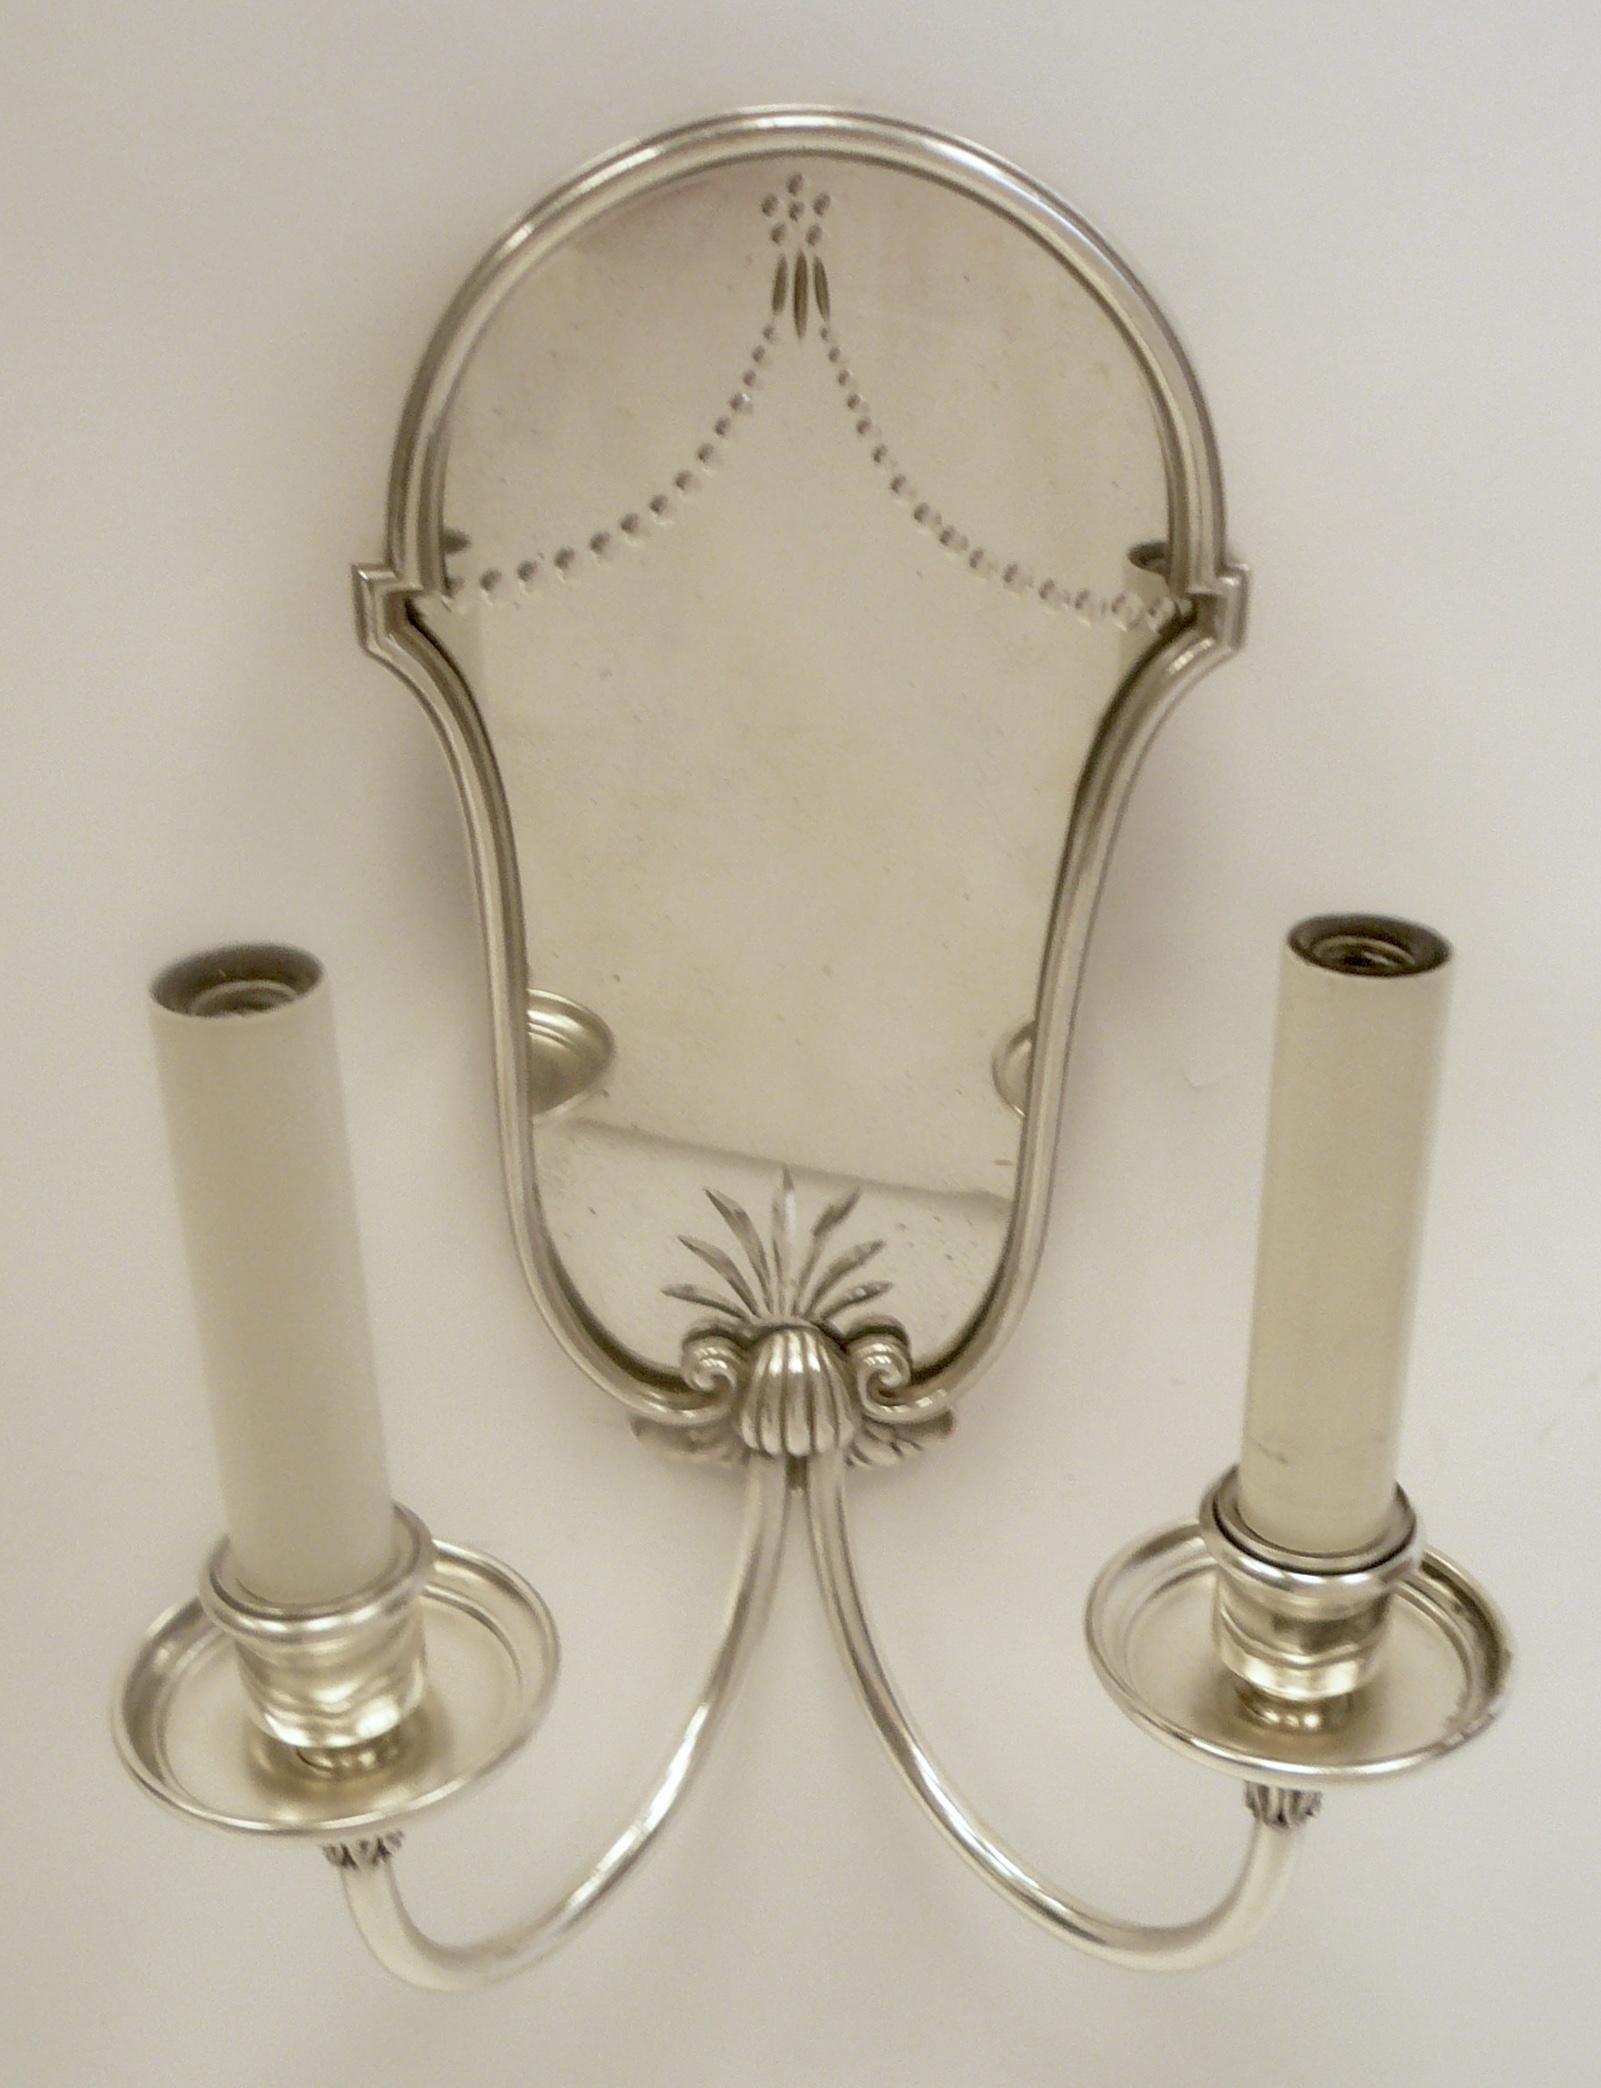 This set of four Caldwell sconces have cartouche shaped mirrored backs with wheel cut designs.